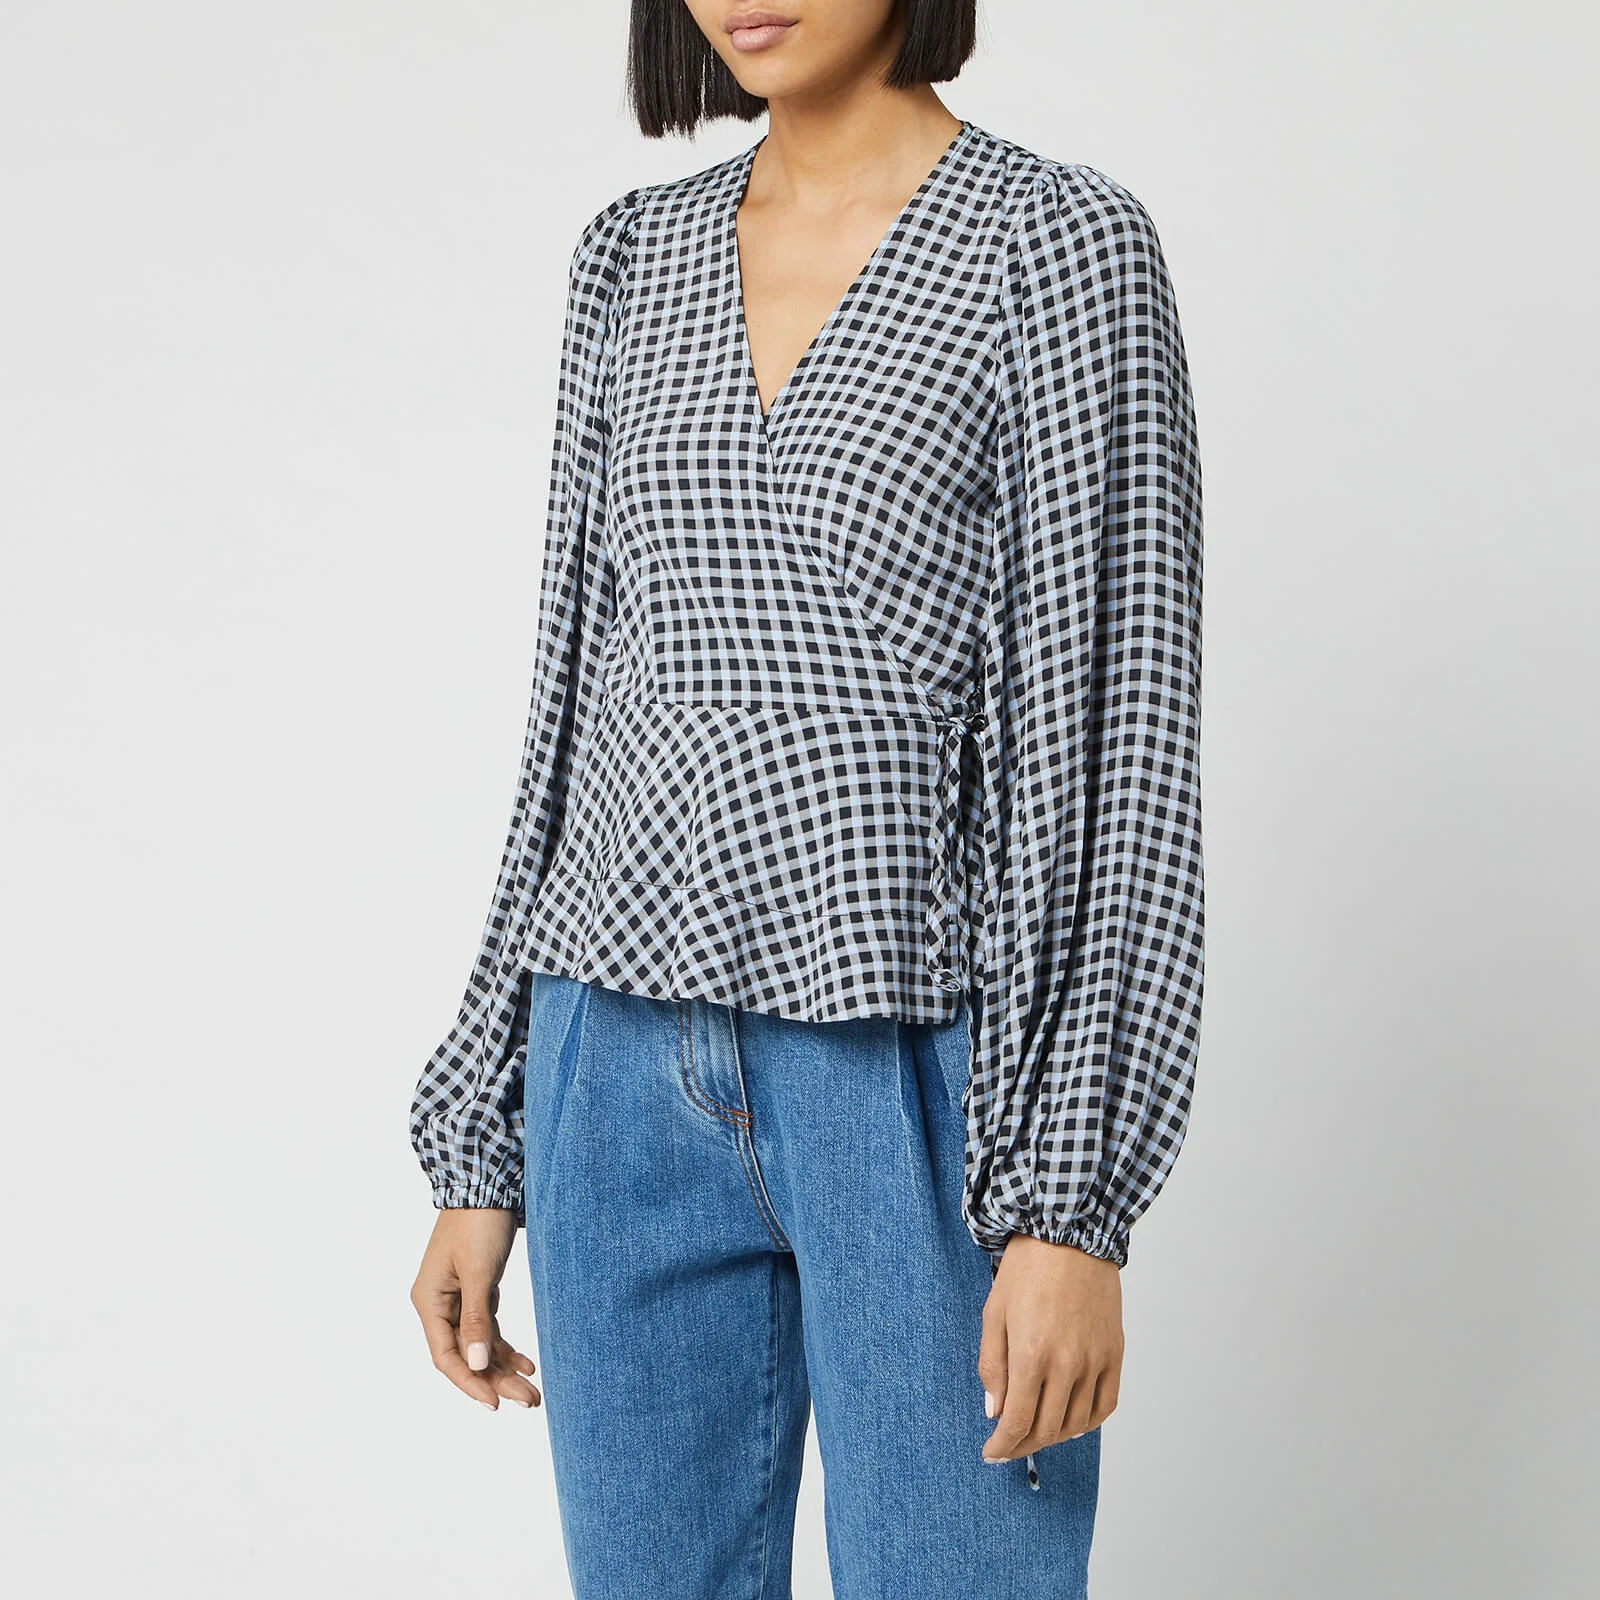 Ganni Women's Checked Printed Crepe Wrap Blouse - Brunnera Blue Image 1